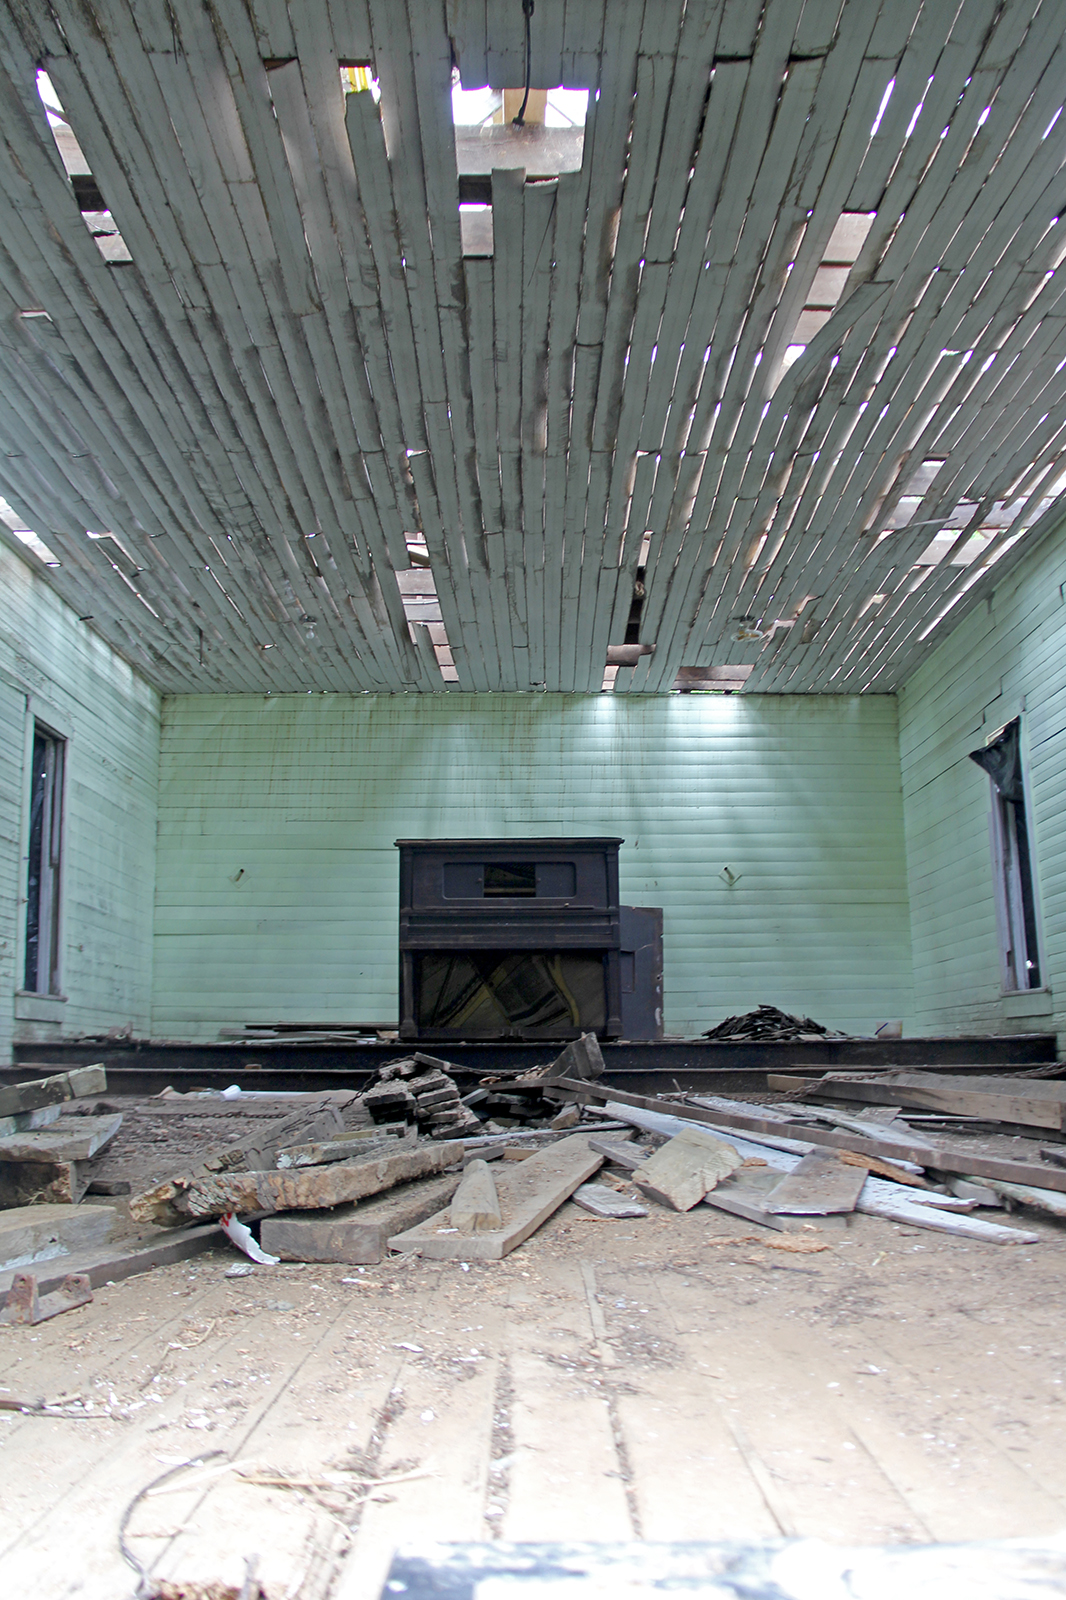 Inside of unfinished one-room schoolhouse with loose boards scattered on the floor